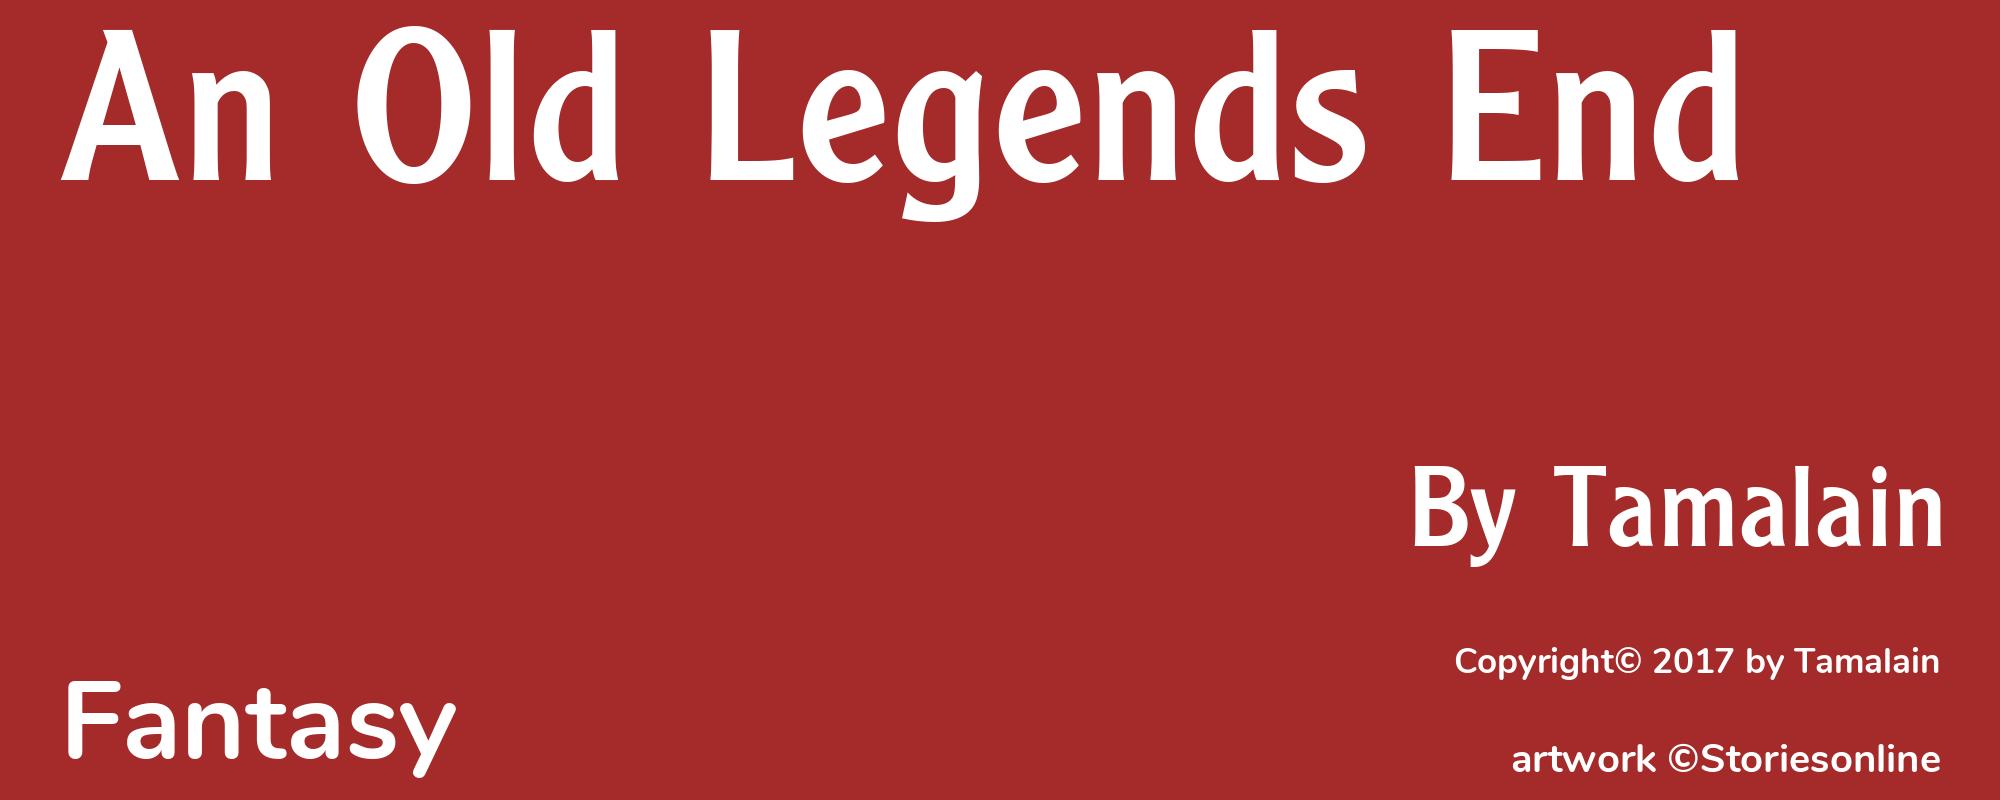 An Old Legends End - Cover